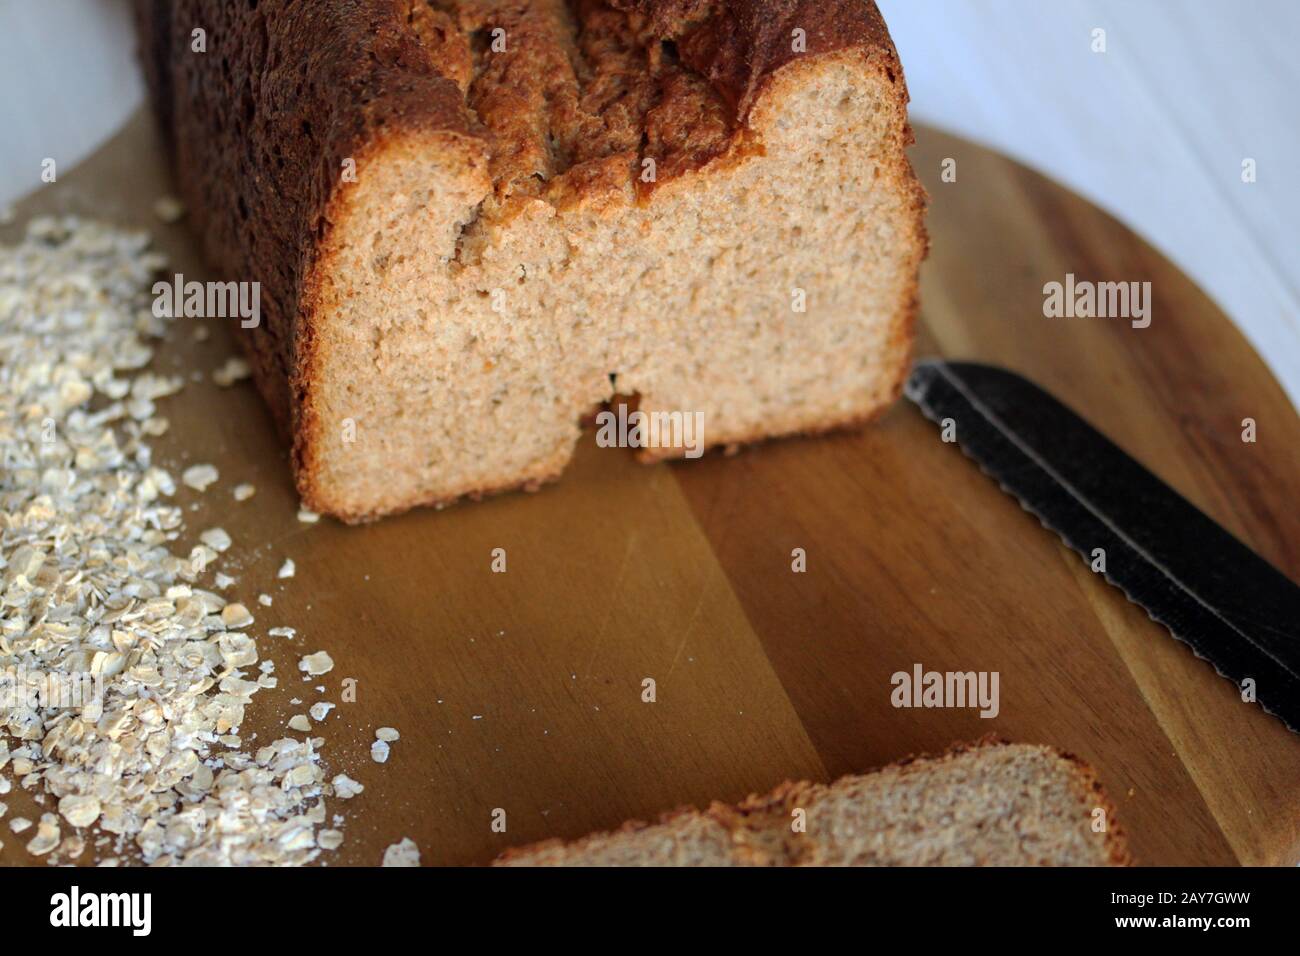 Multigrain bread from a vending machine. Homemade bread. Whole wheat bread. Healthy bread.  Bread with oatmeal and grains. Stock Photo